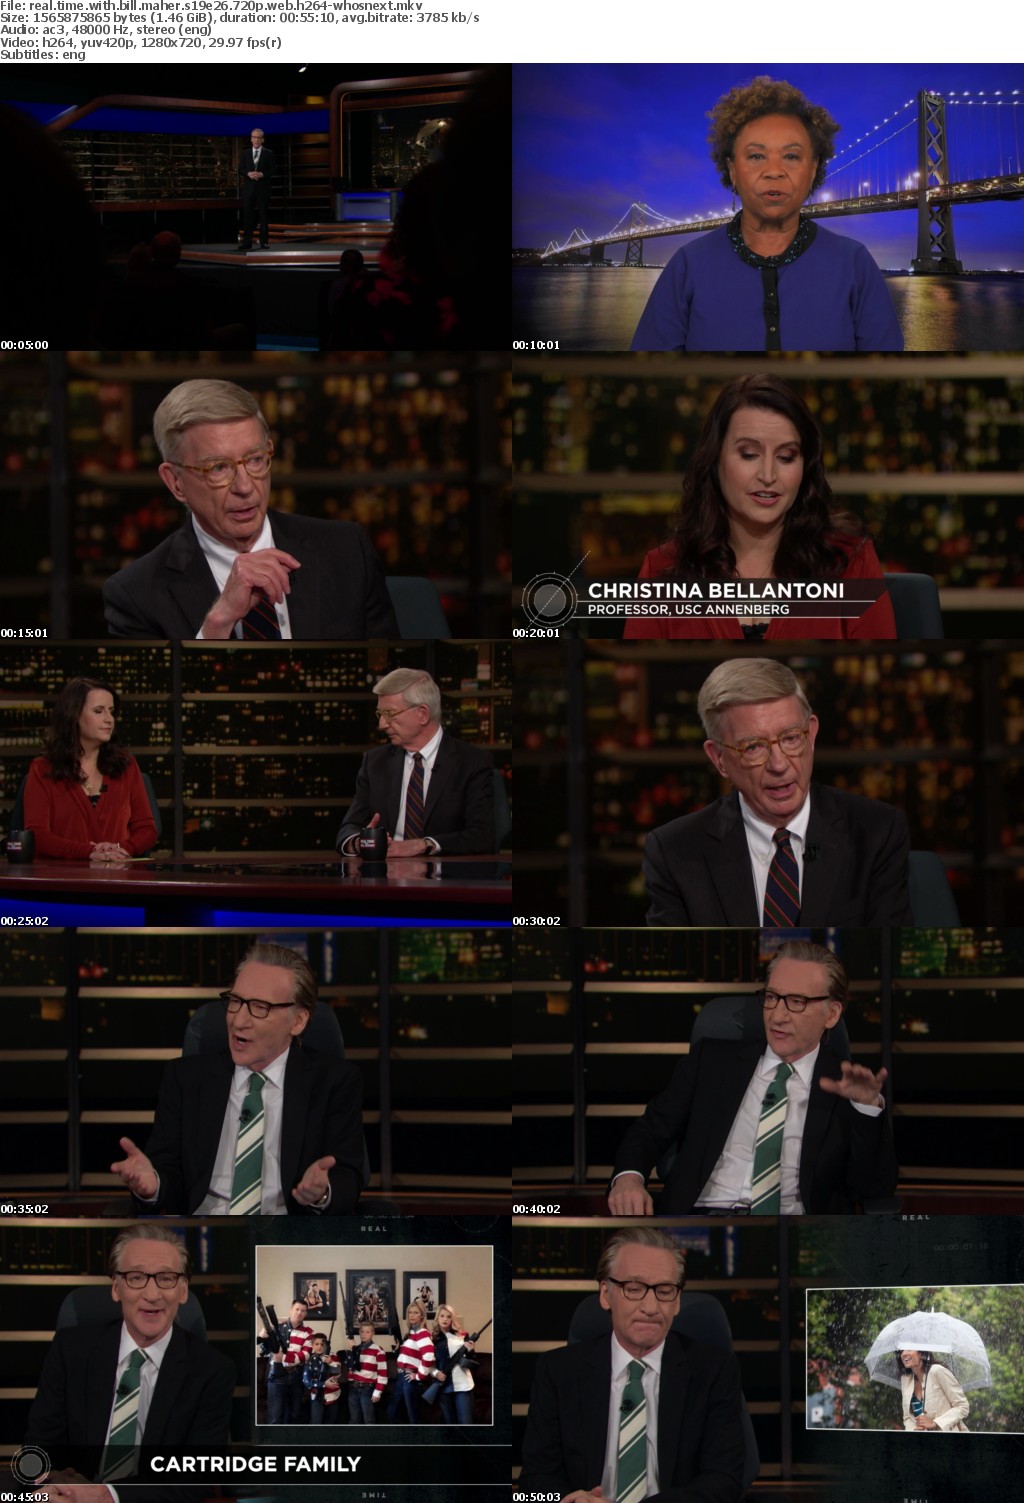 Real Time with Bill Maher S19E26 720p WEB H264-WHOSNEXT